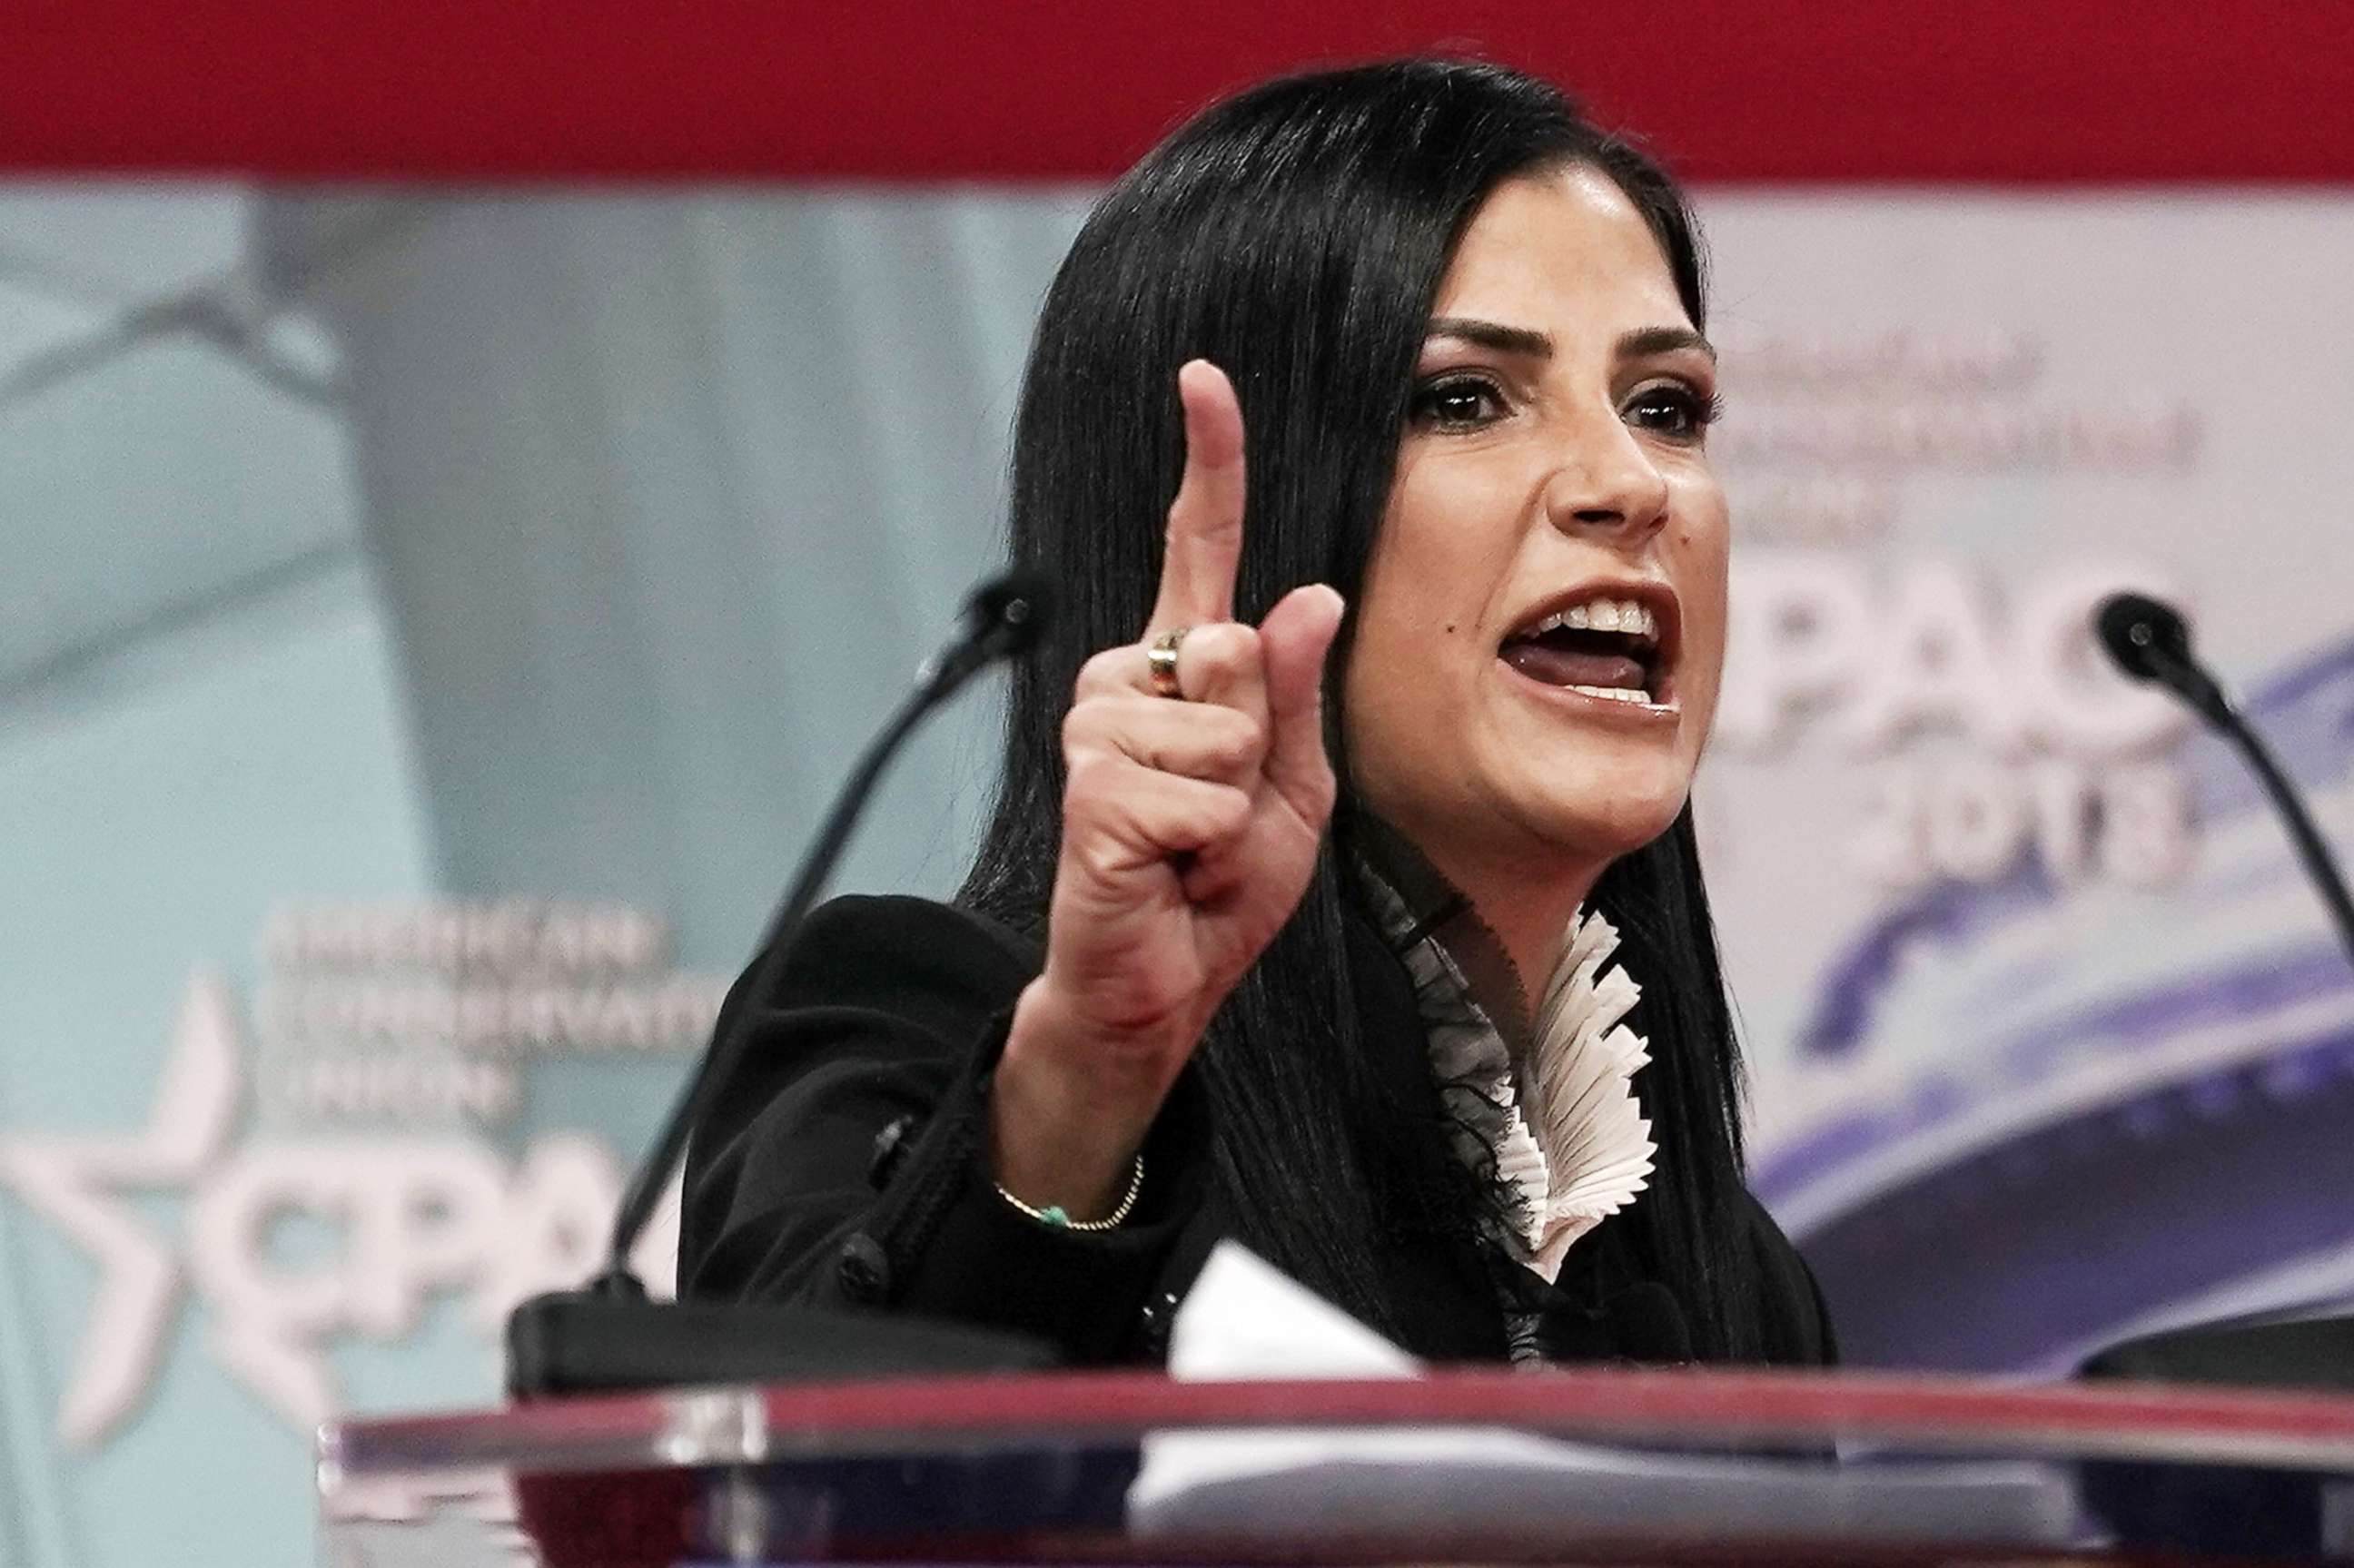 PHOTO: National Rifle Association spokeswoman Dana Loesch speaks during CPAC 2018 Feb. 22, 2018 in National Harbor, Md.